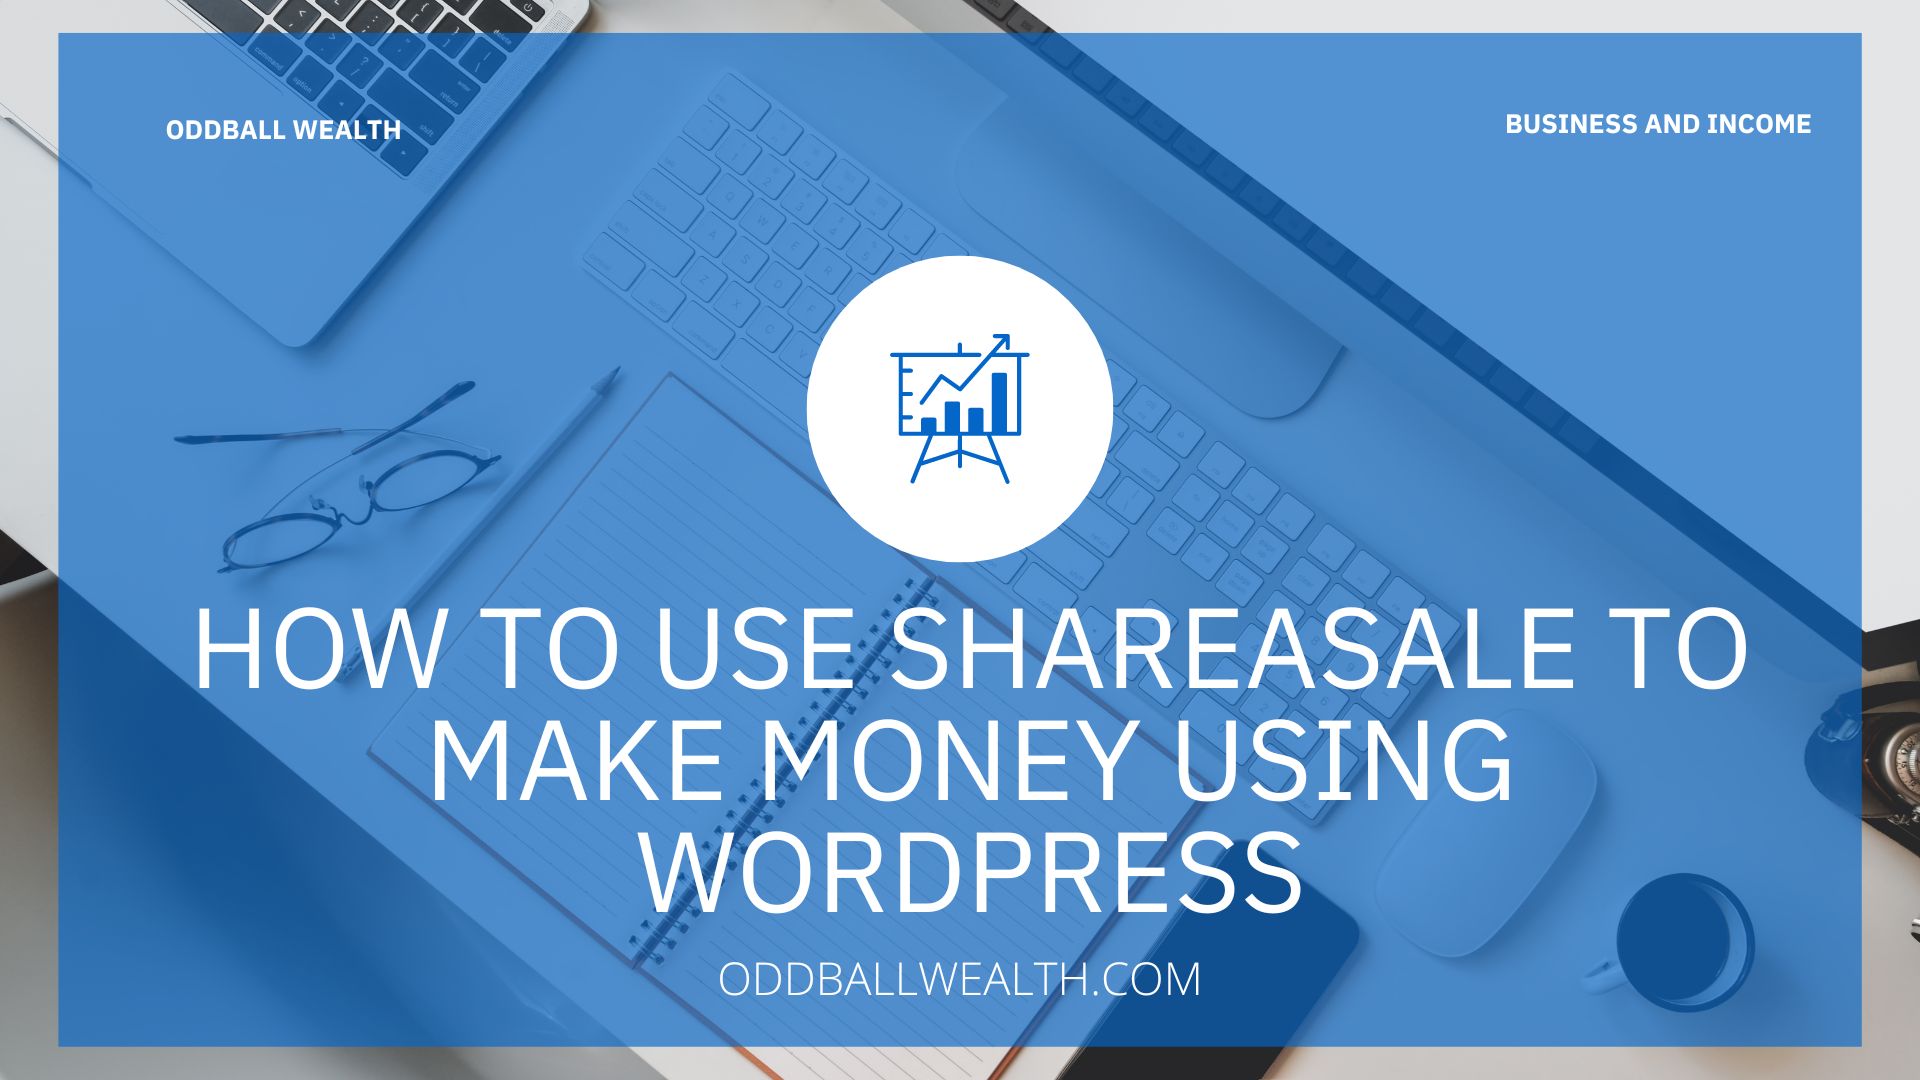 How to Use Shareasale to Make Money using WordPress